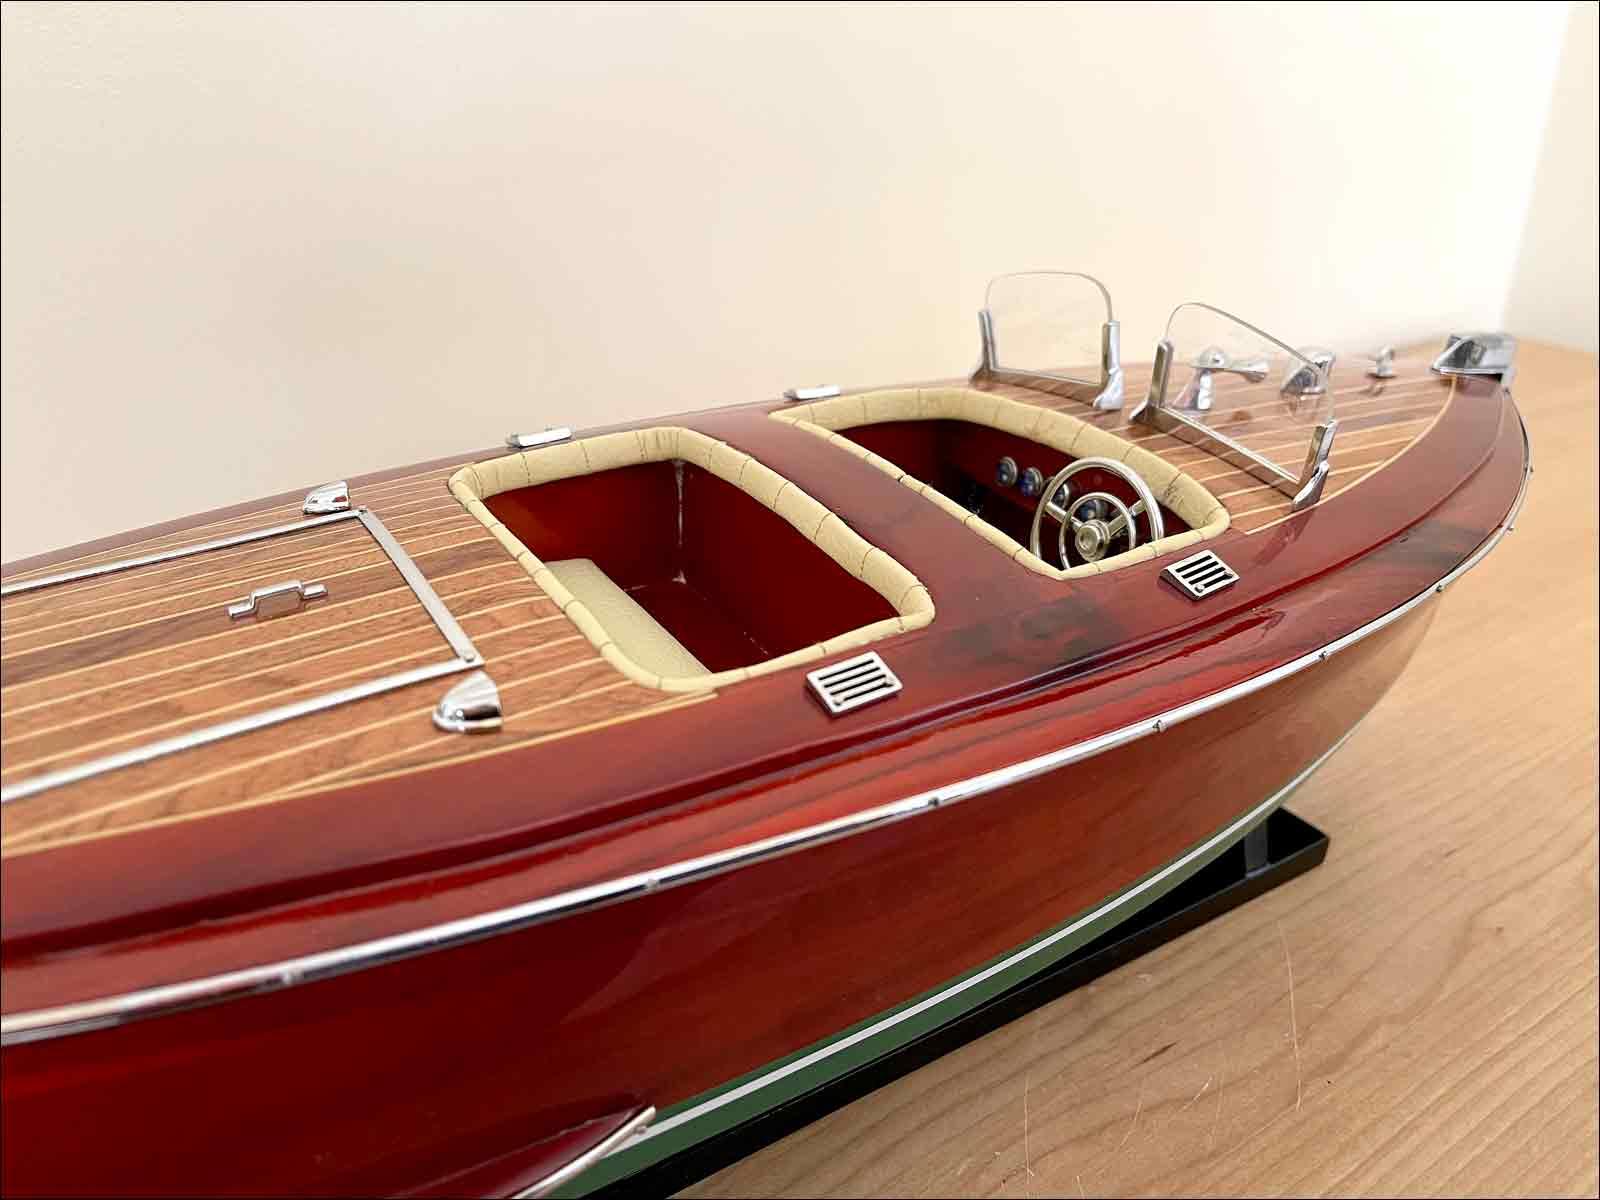 Chris Craft Runabout model